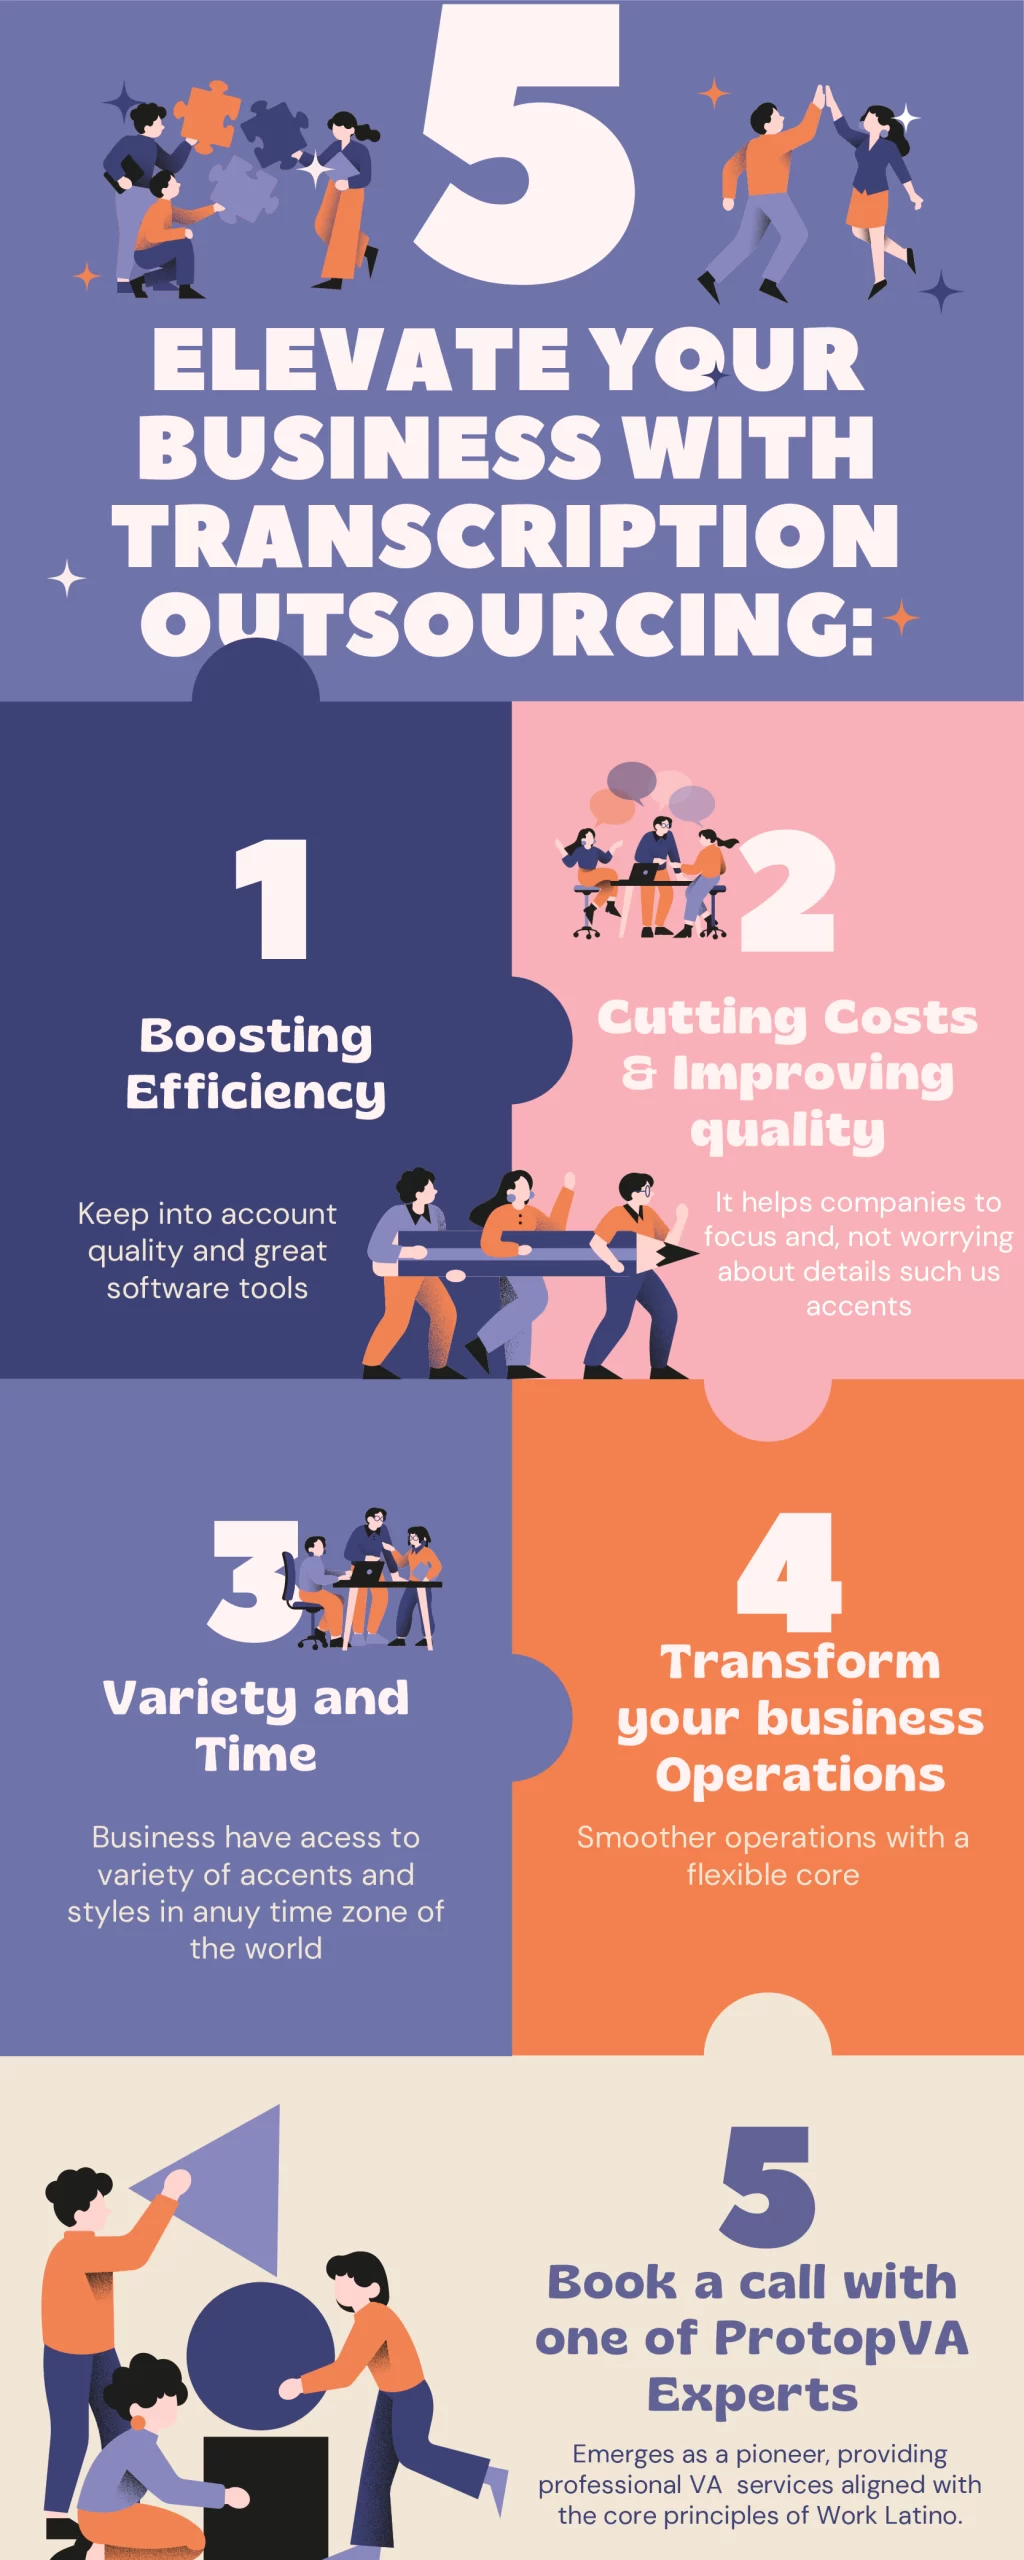 5 ways to elevate your business transcription on outsourcing infographic. Transcription outsourcing is a strategic solution for businesses looking to improve their operational efficiency and accuracy. By partnering with professional transcription services, businesses can ensure that